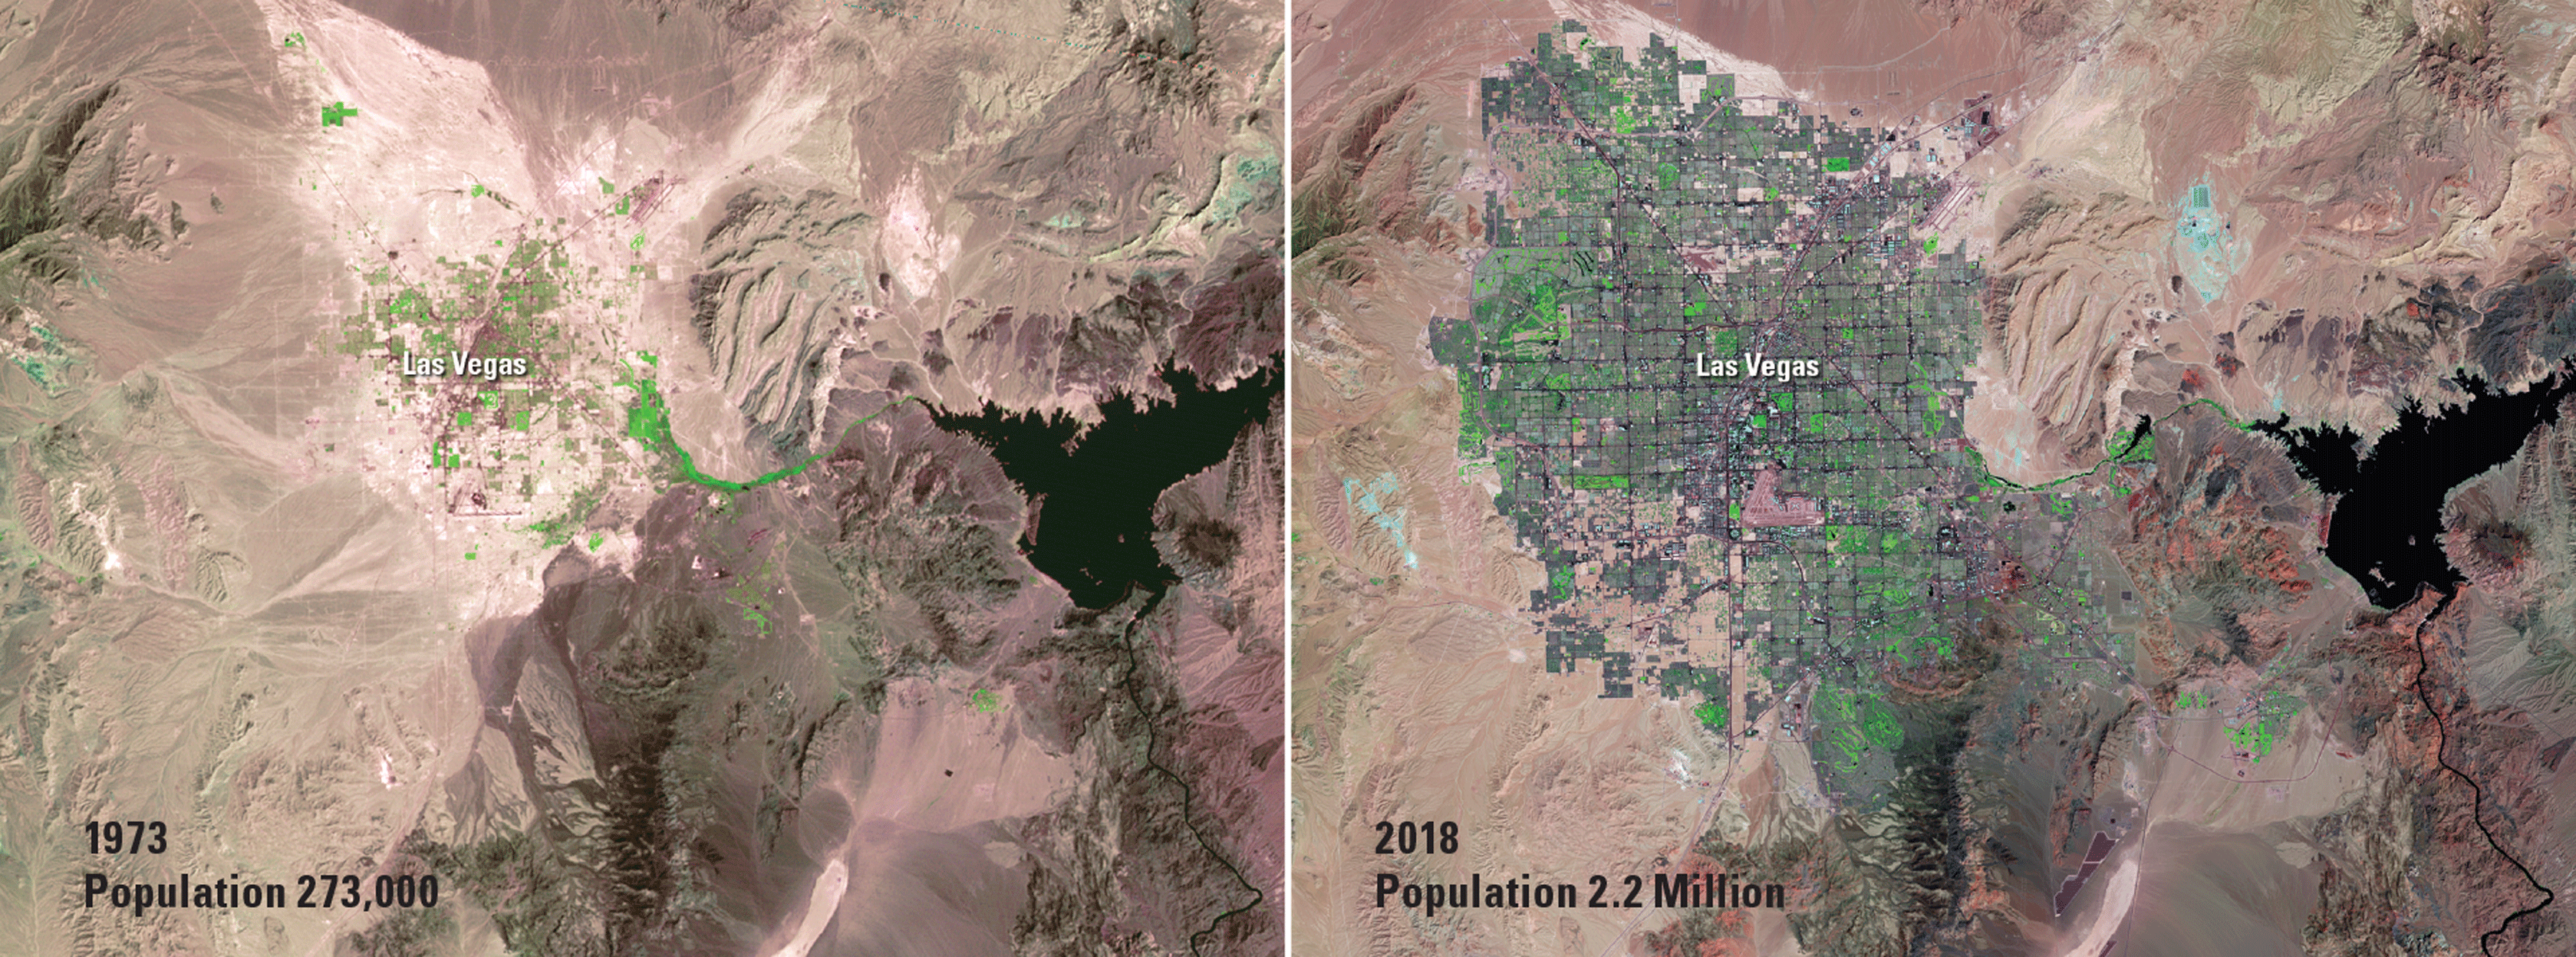 Comparison of the size of Las Vegas in 1973 and 2018. The area has more than quadrupled
                     in that time.